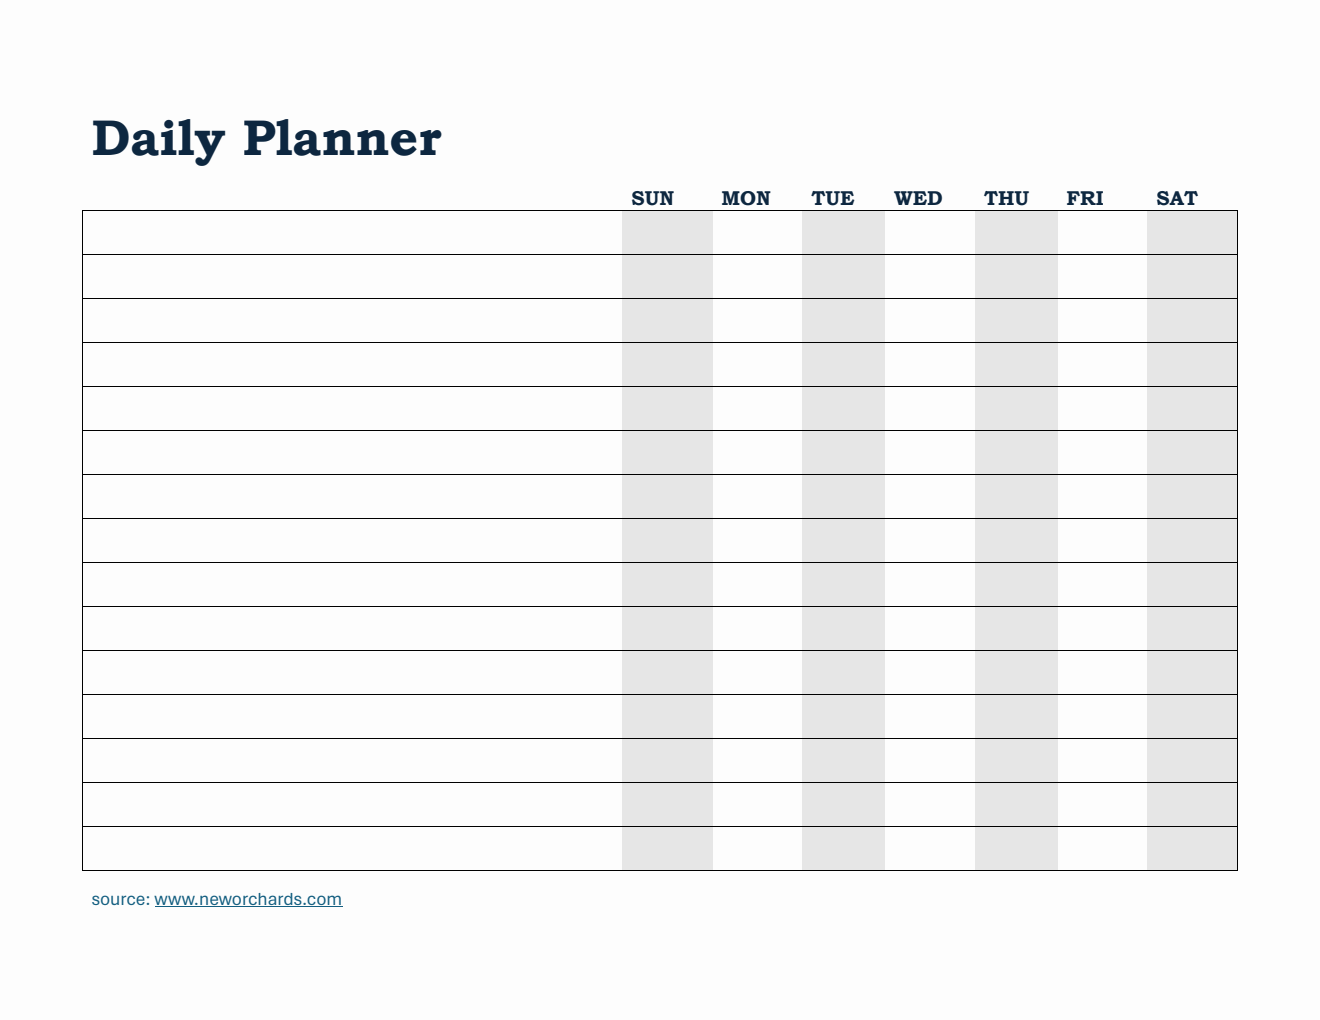 Daily Planner and Checklist Template in PDF (Simple)